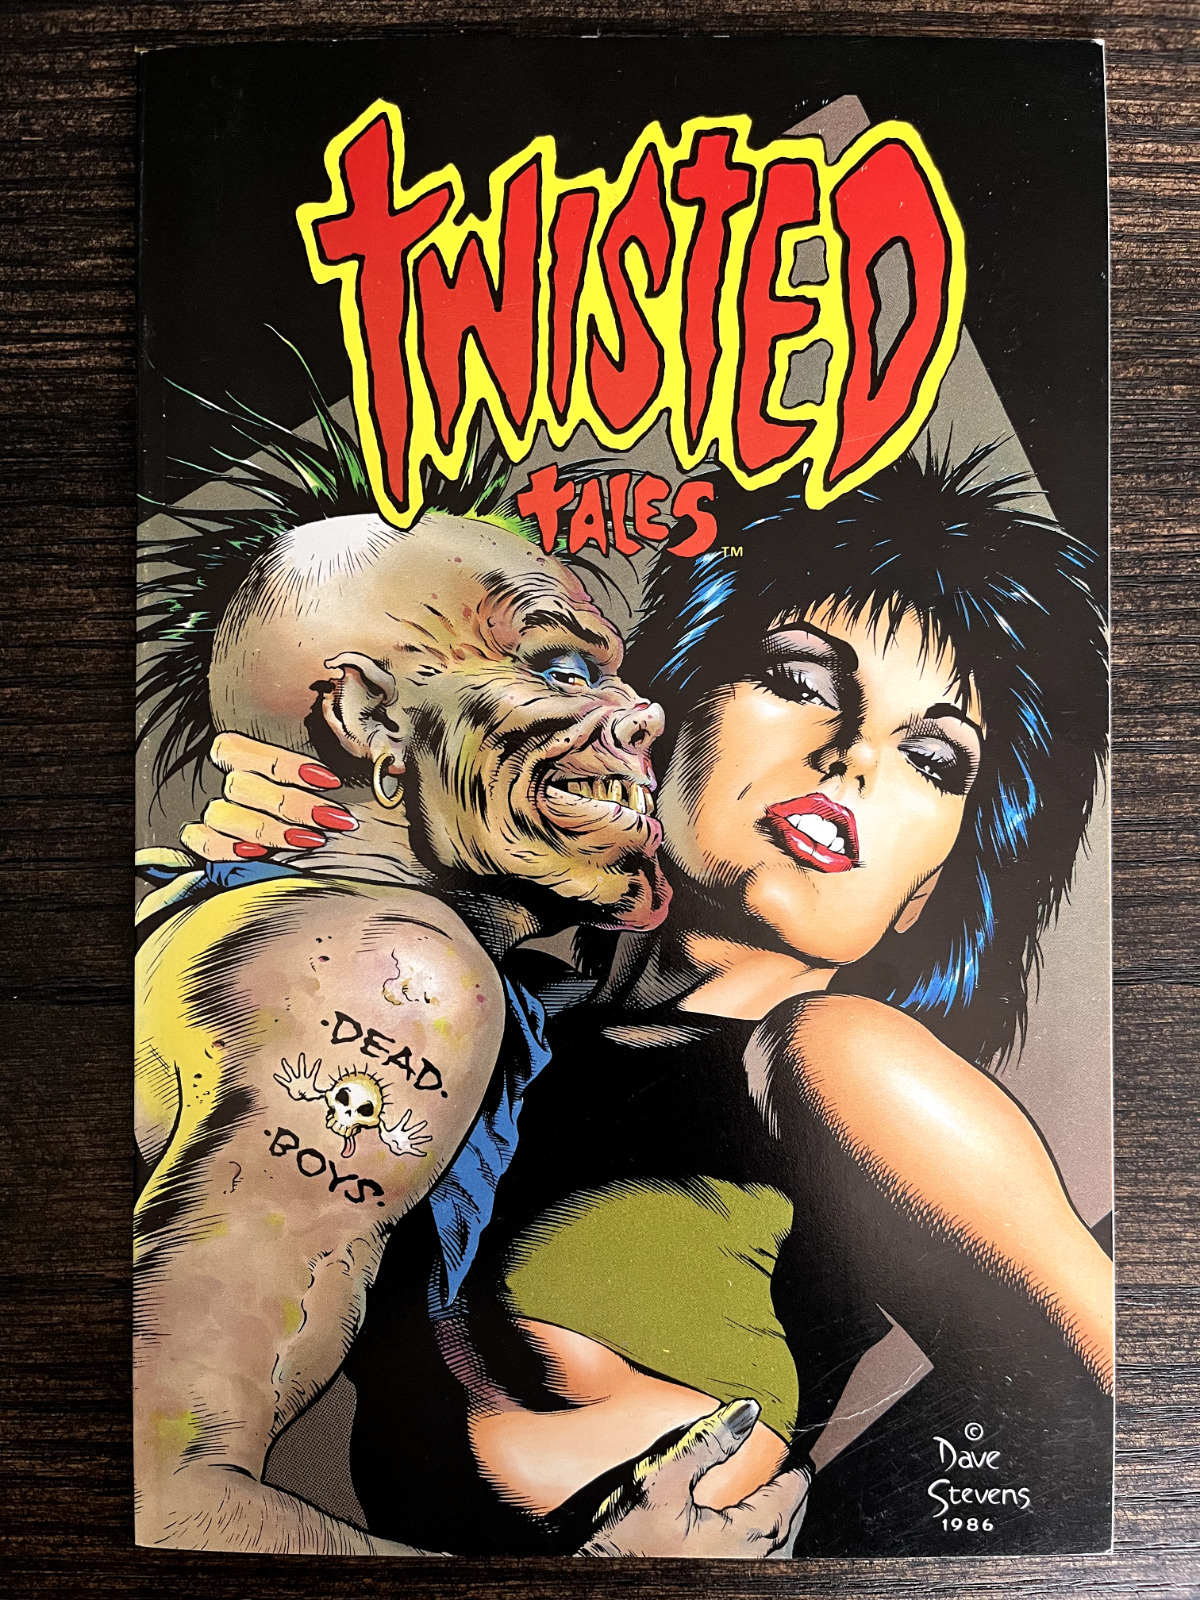 TWISTED TALES One shot (Eclipse Comics, 1987) Dave Stevens Cover